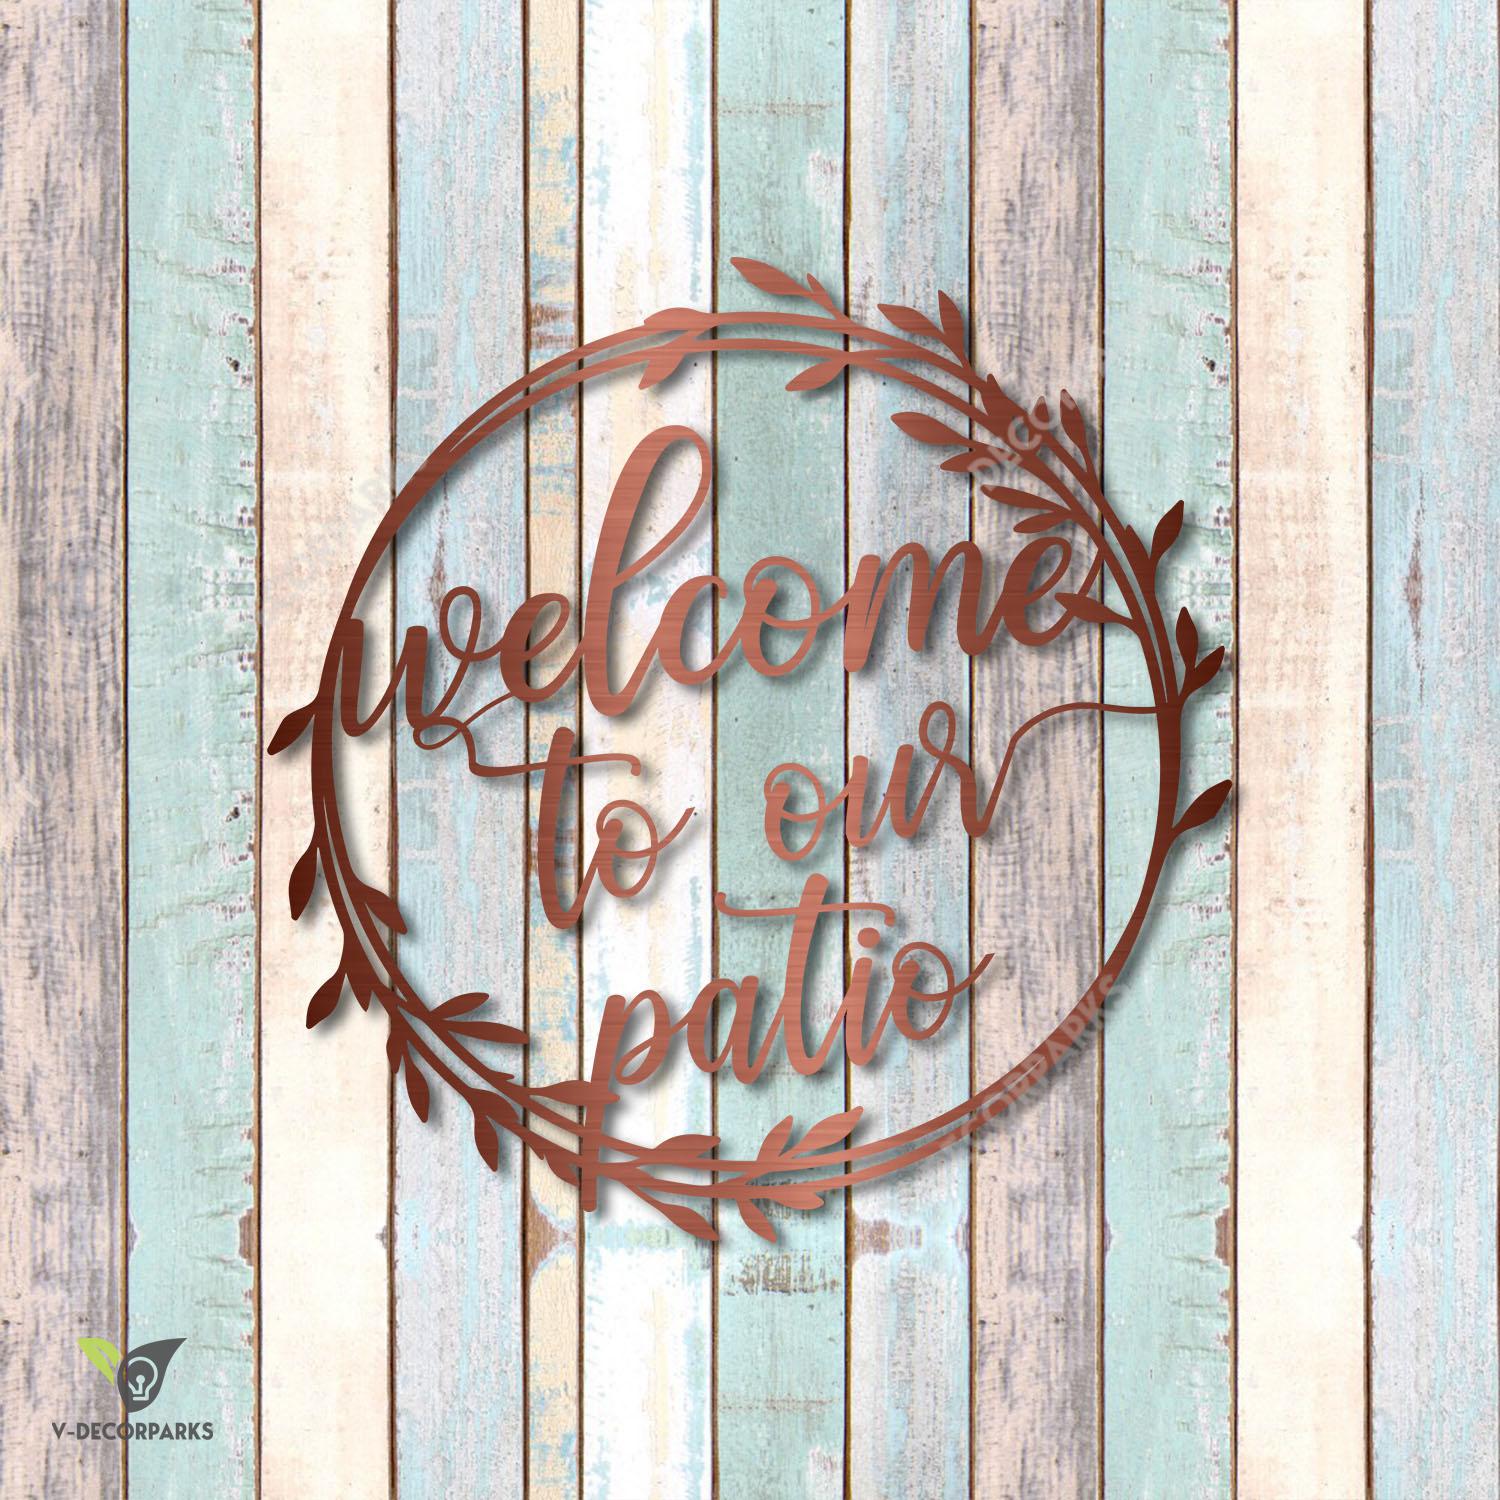 Welcome To Our Patio Copper Metal Sign, Leaves Wearth Steel Garden Plaque